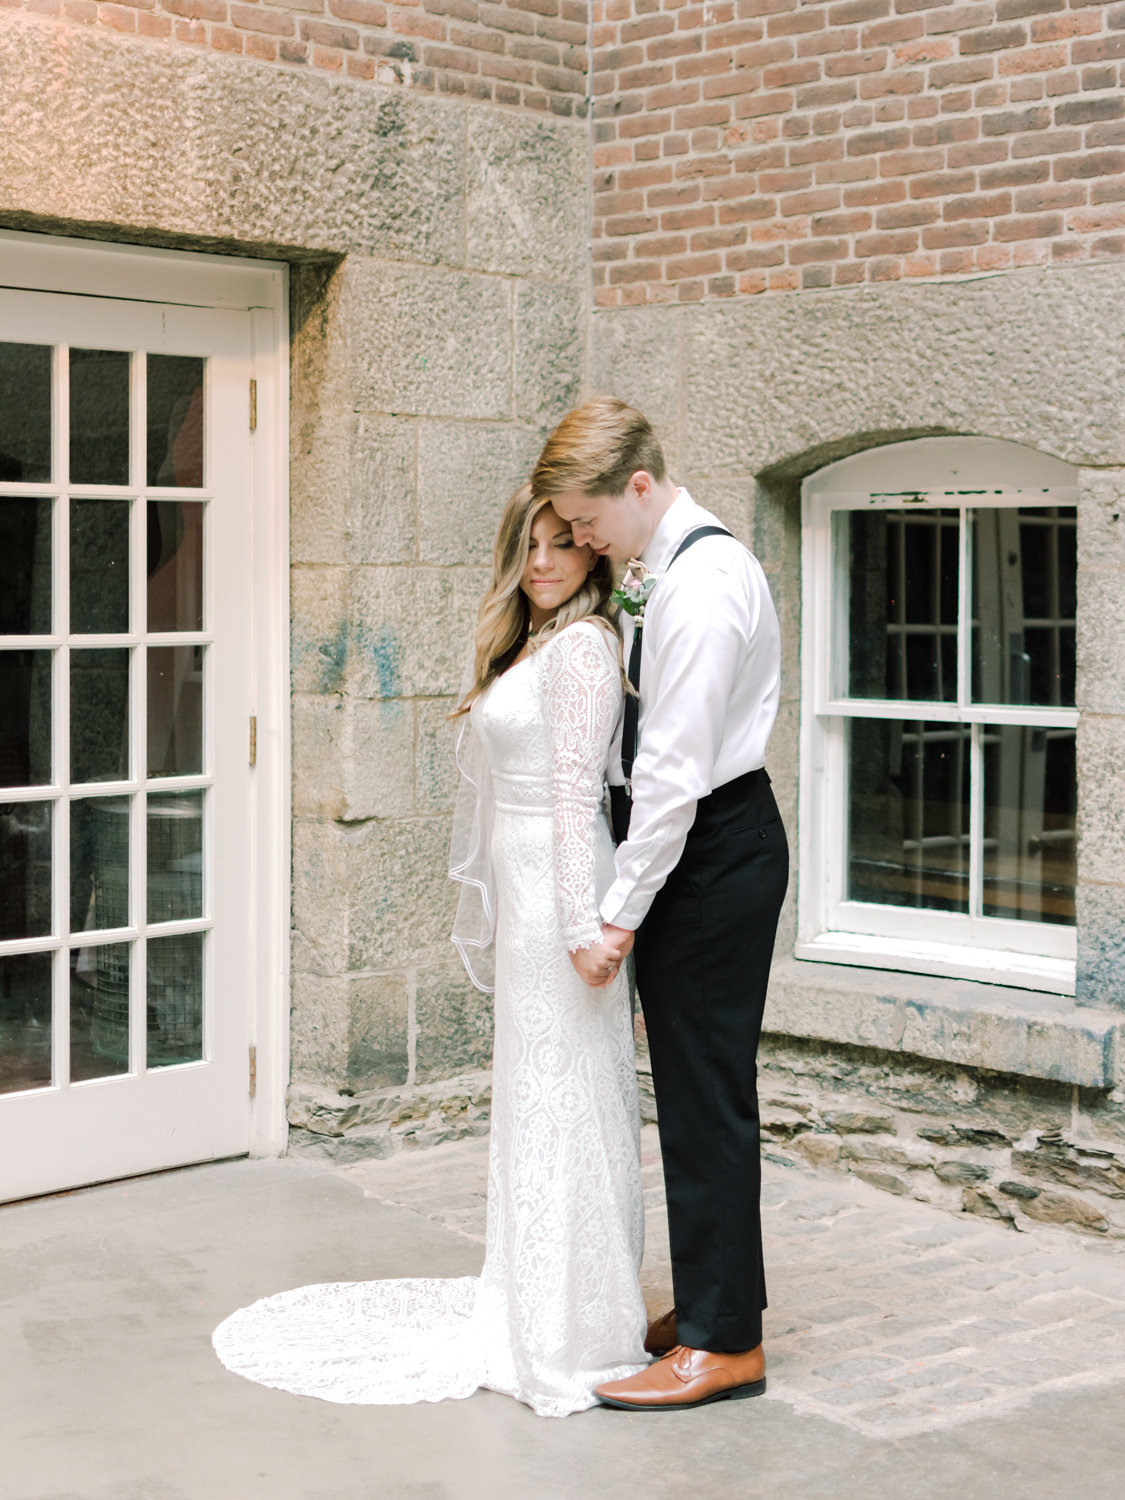 Jacqueline Anne Photography - Jessica and Aaron in Halifax-14